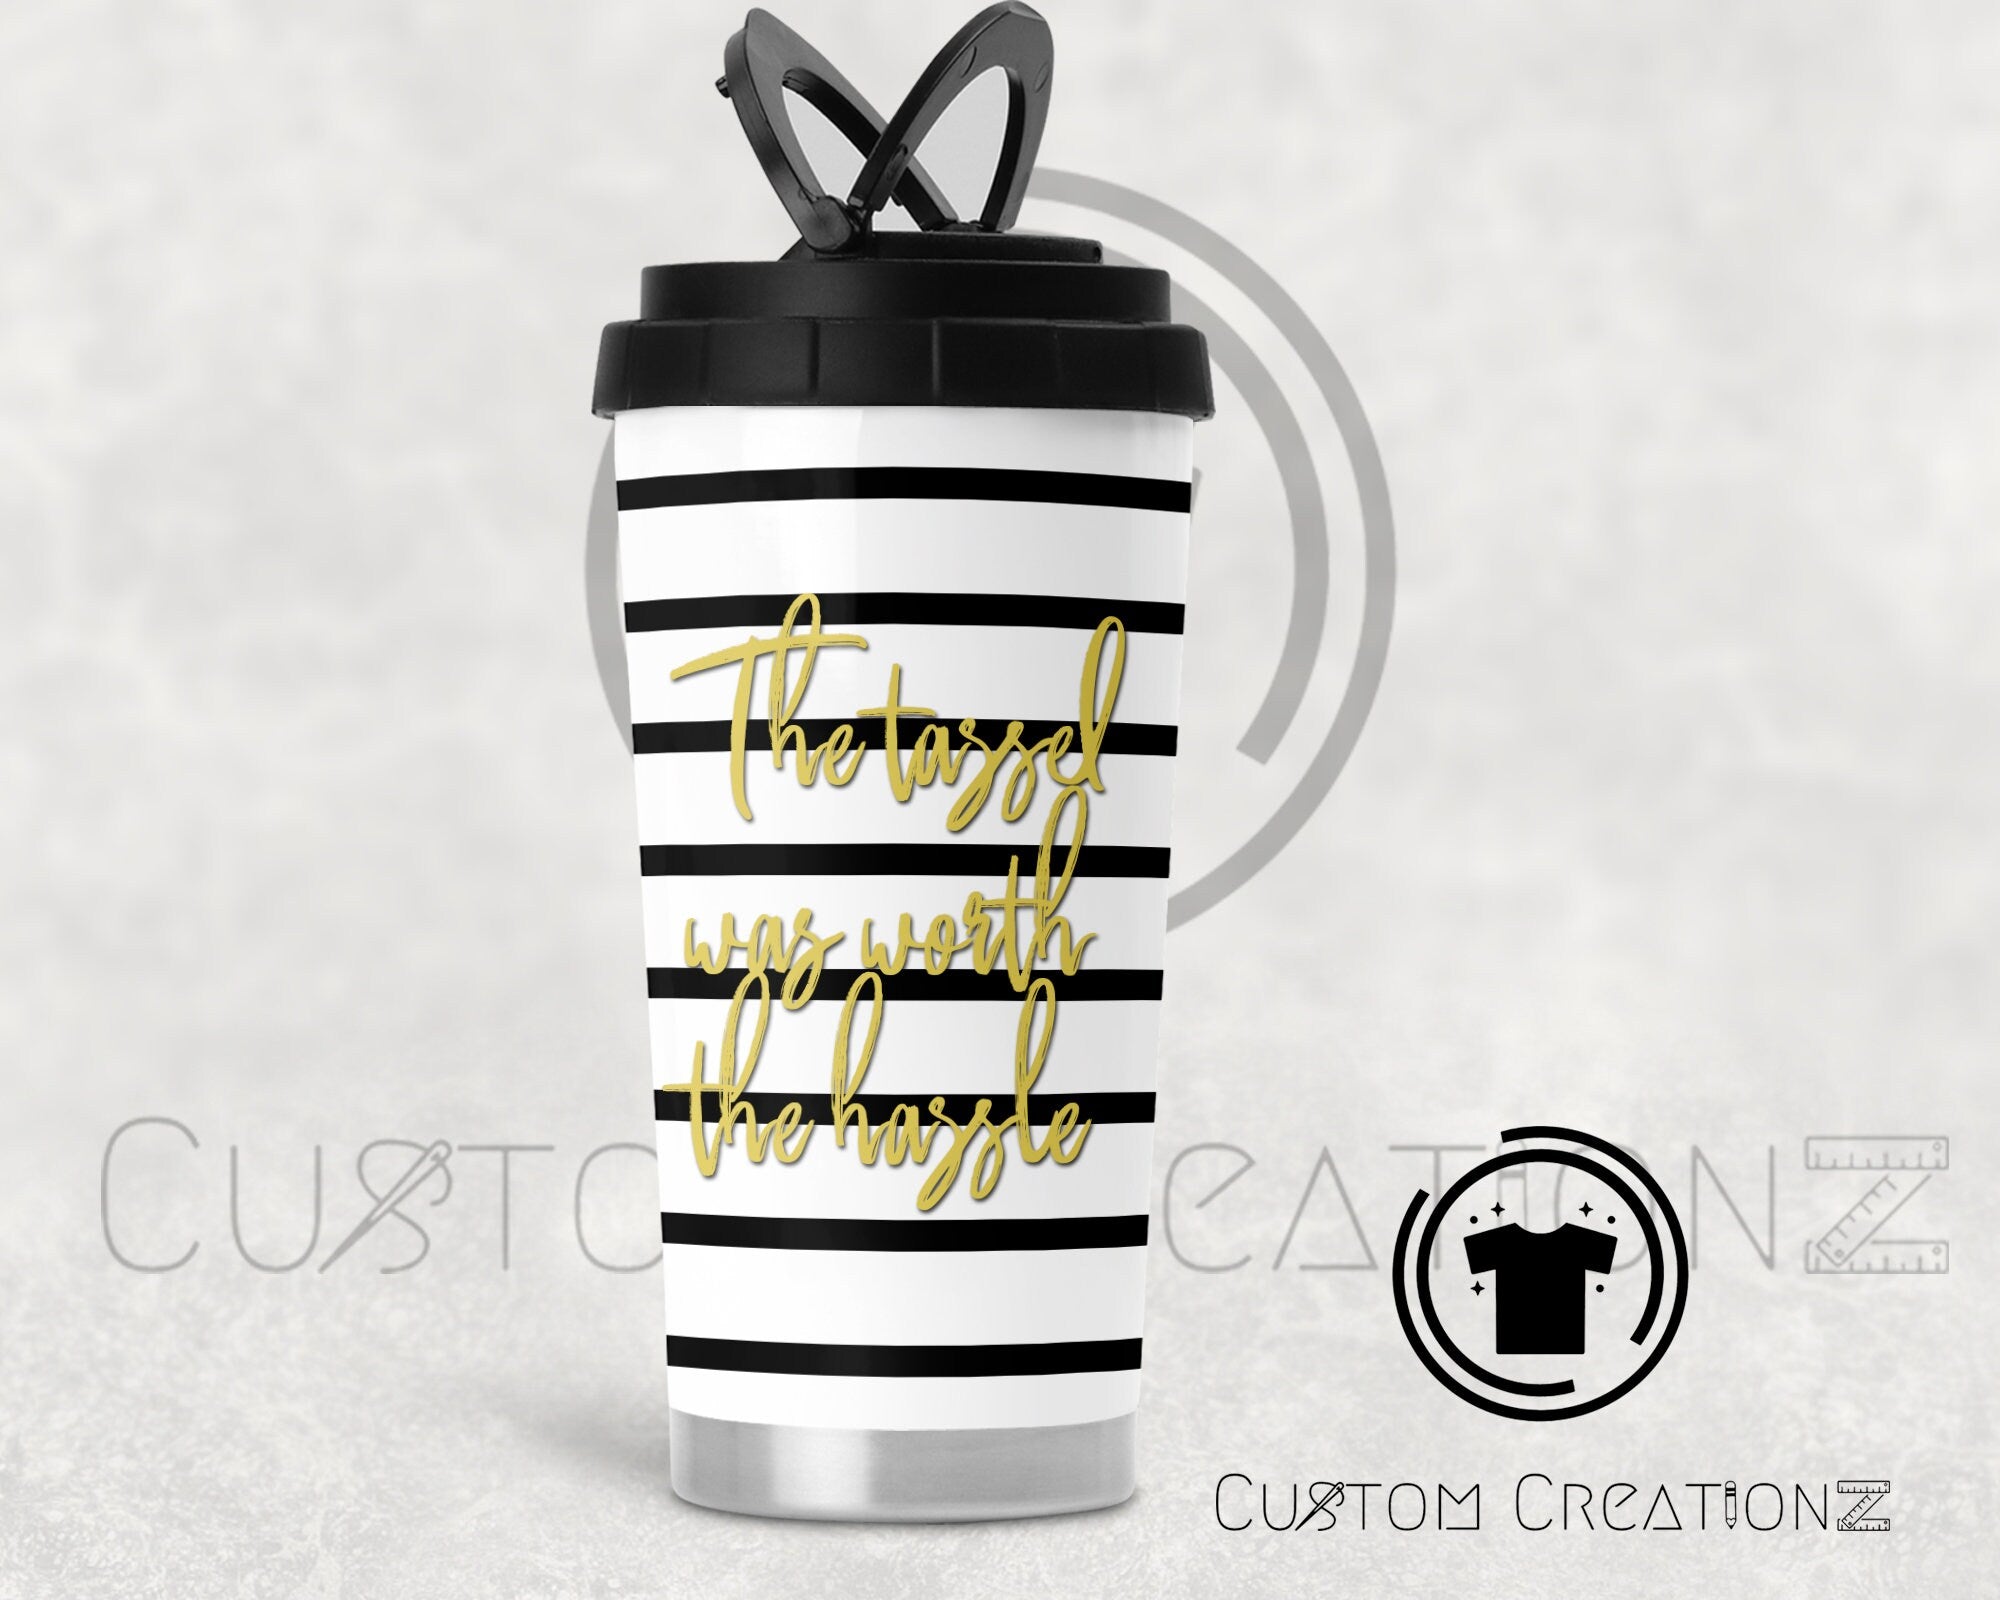 Stainless Steel Travel mug - The tassel was worth the Hassle